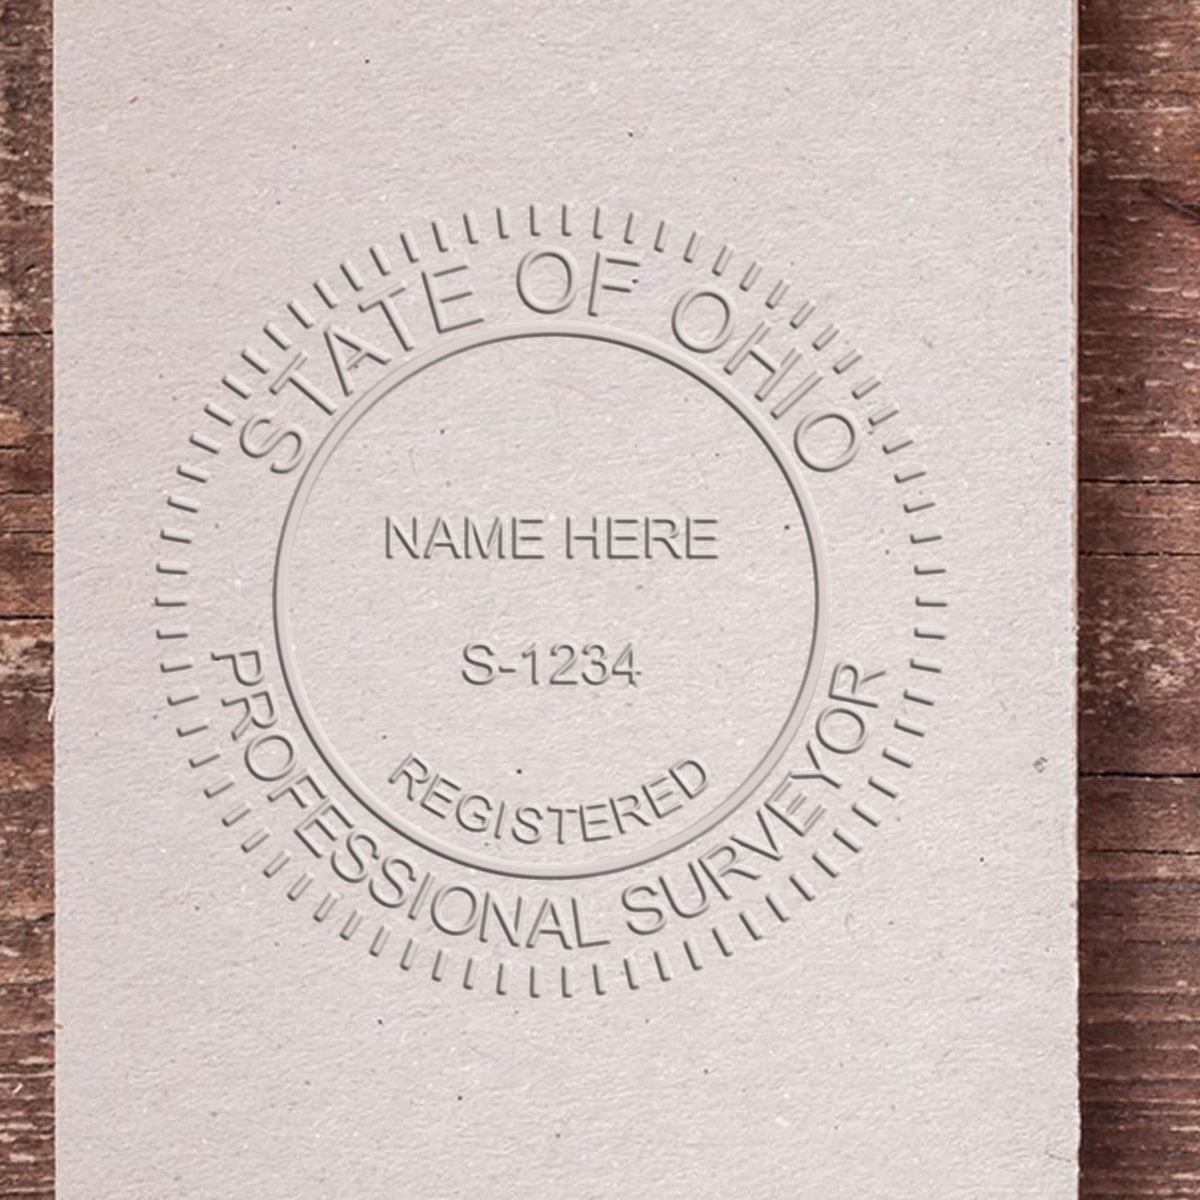 A photograph of the Hybrid Ohio Land Surveyor Seal stamp impression reveals a vivid, professional image of the on paper.